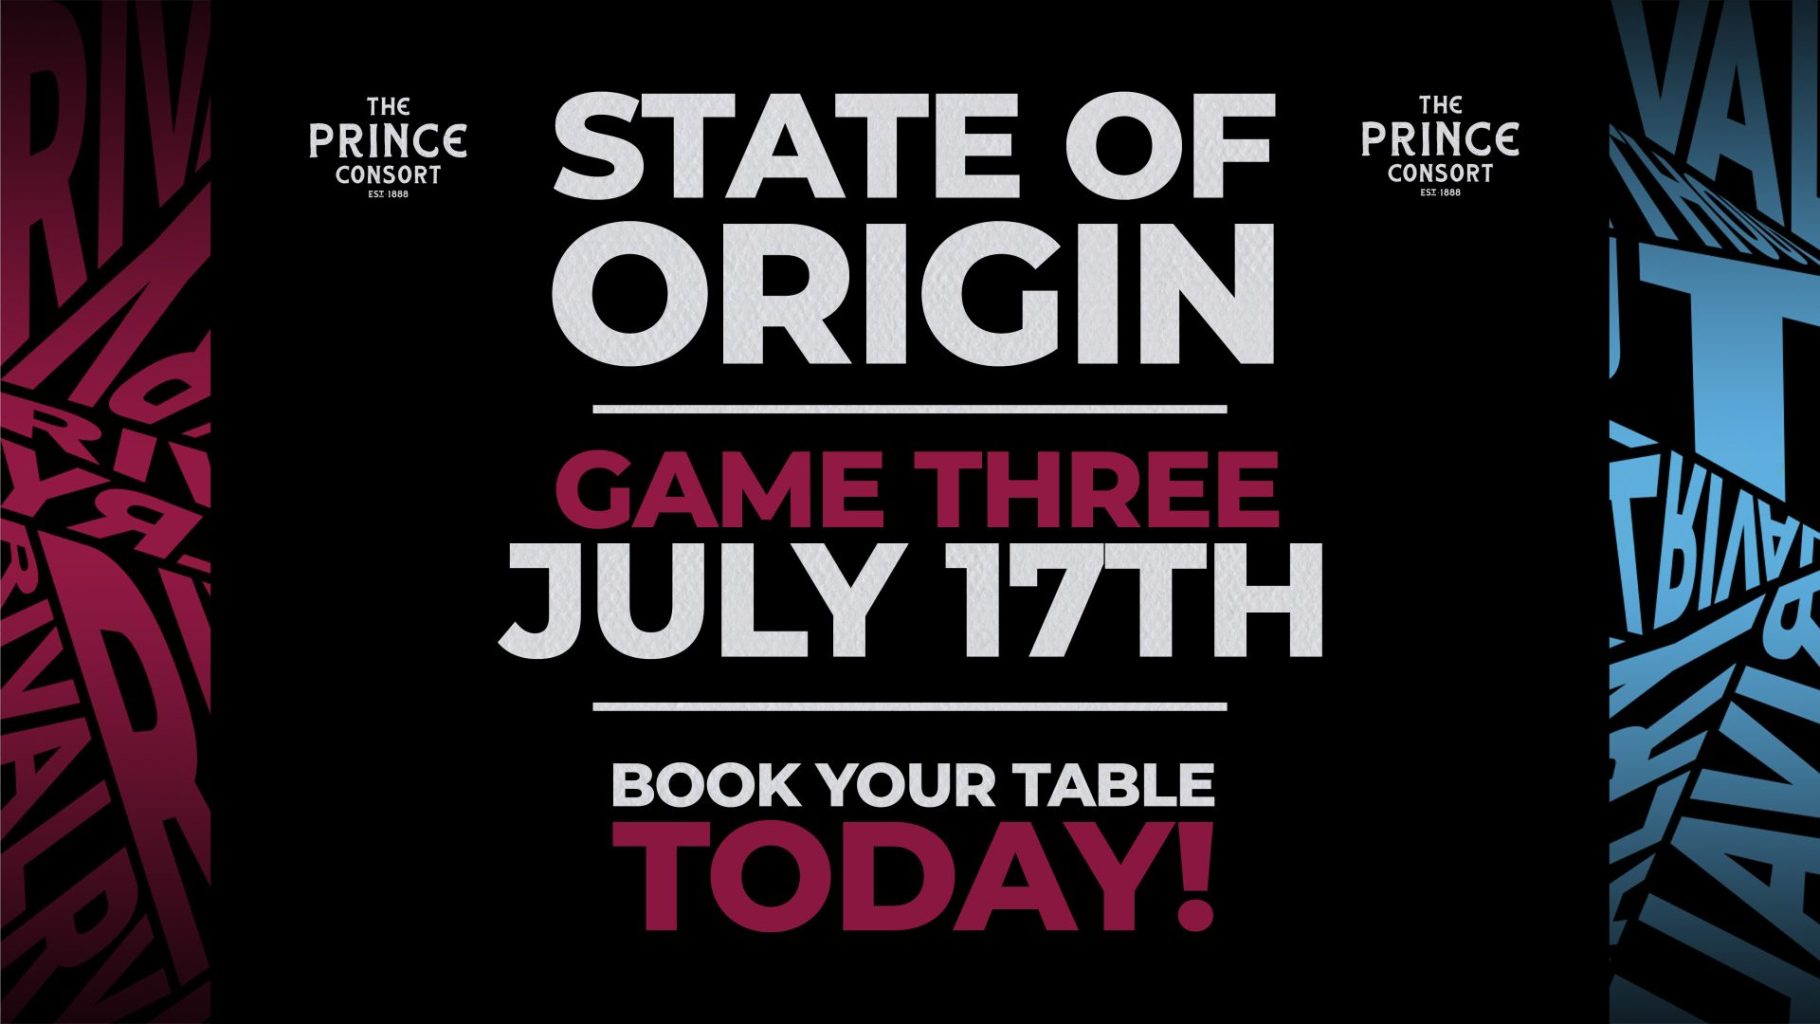 State of Origin Game Three | Events at The Prince Consort